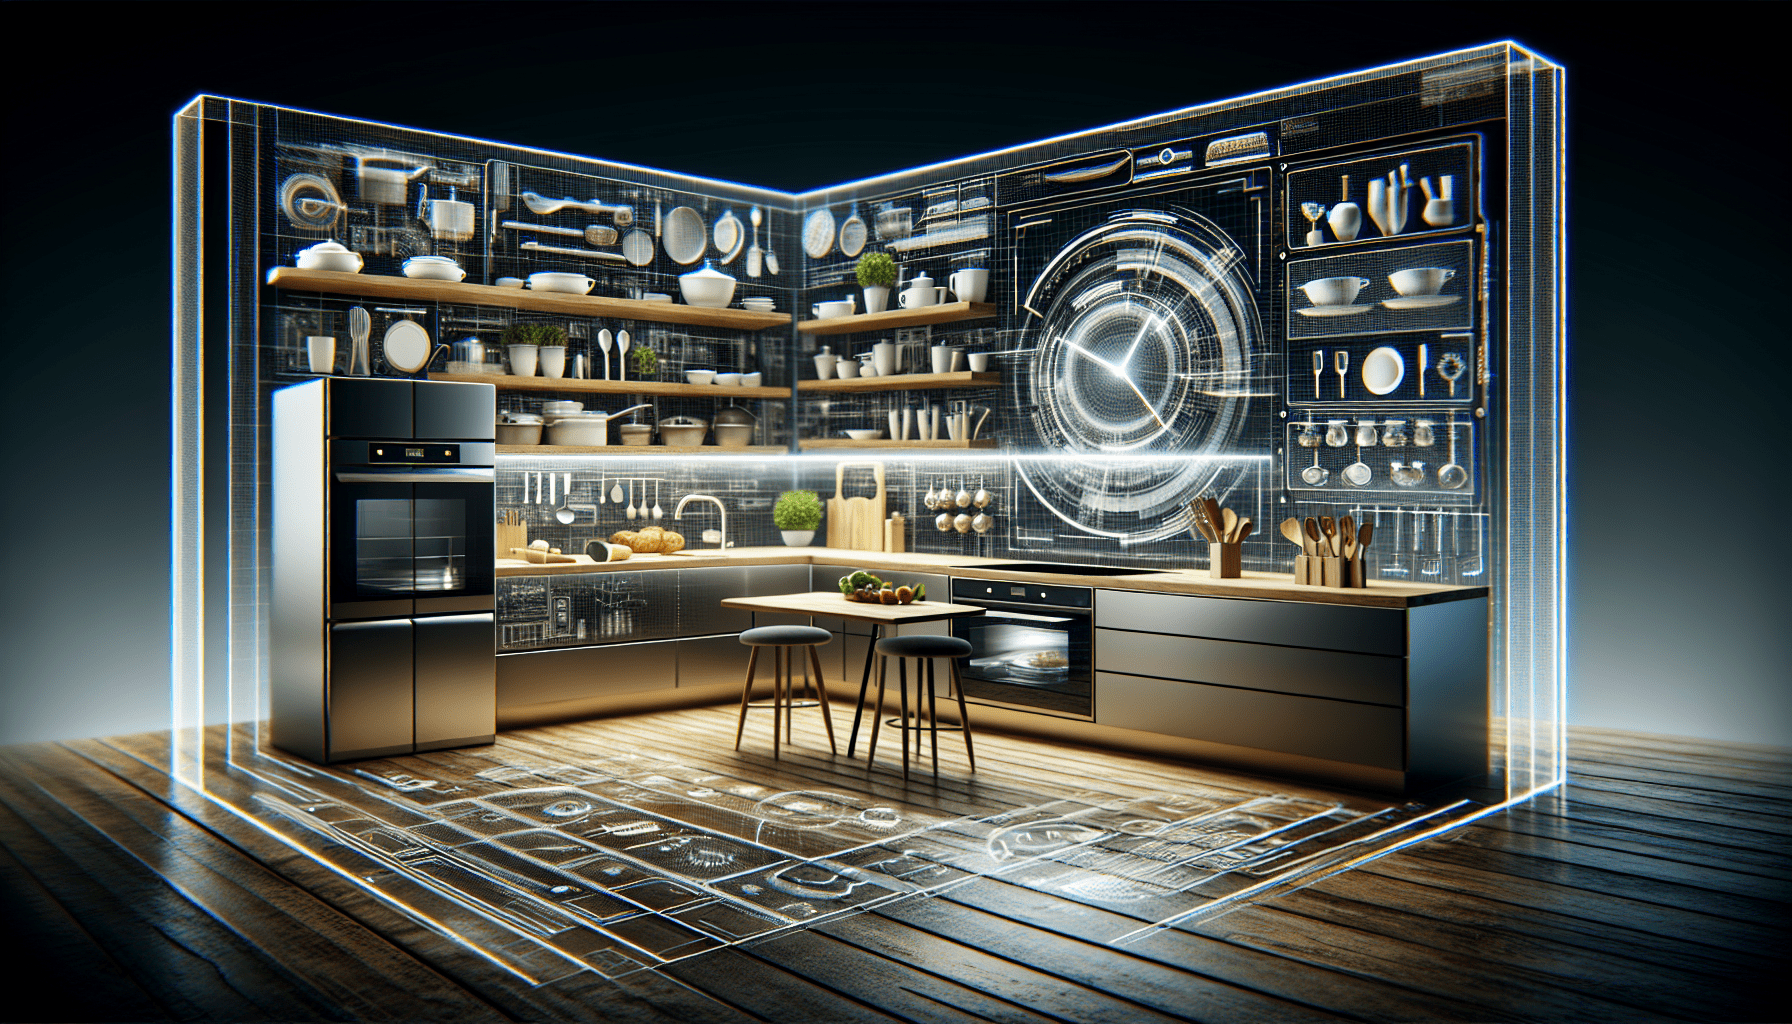 What Is Next For Kitchens?